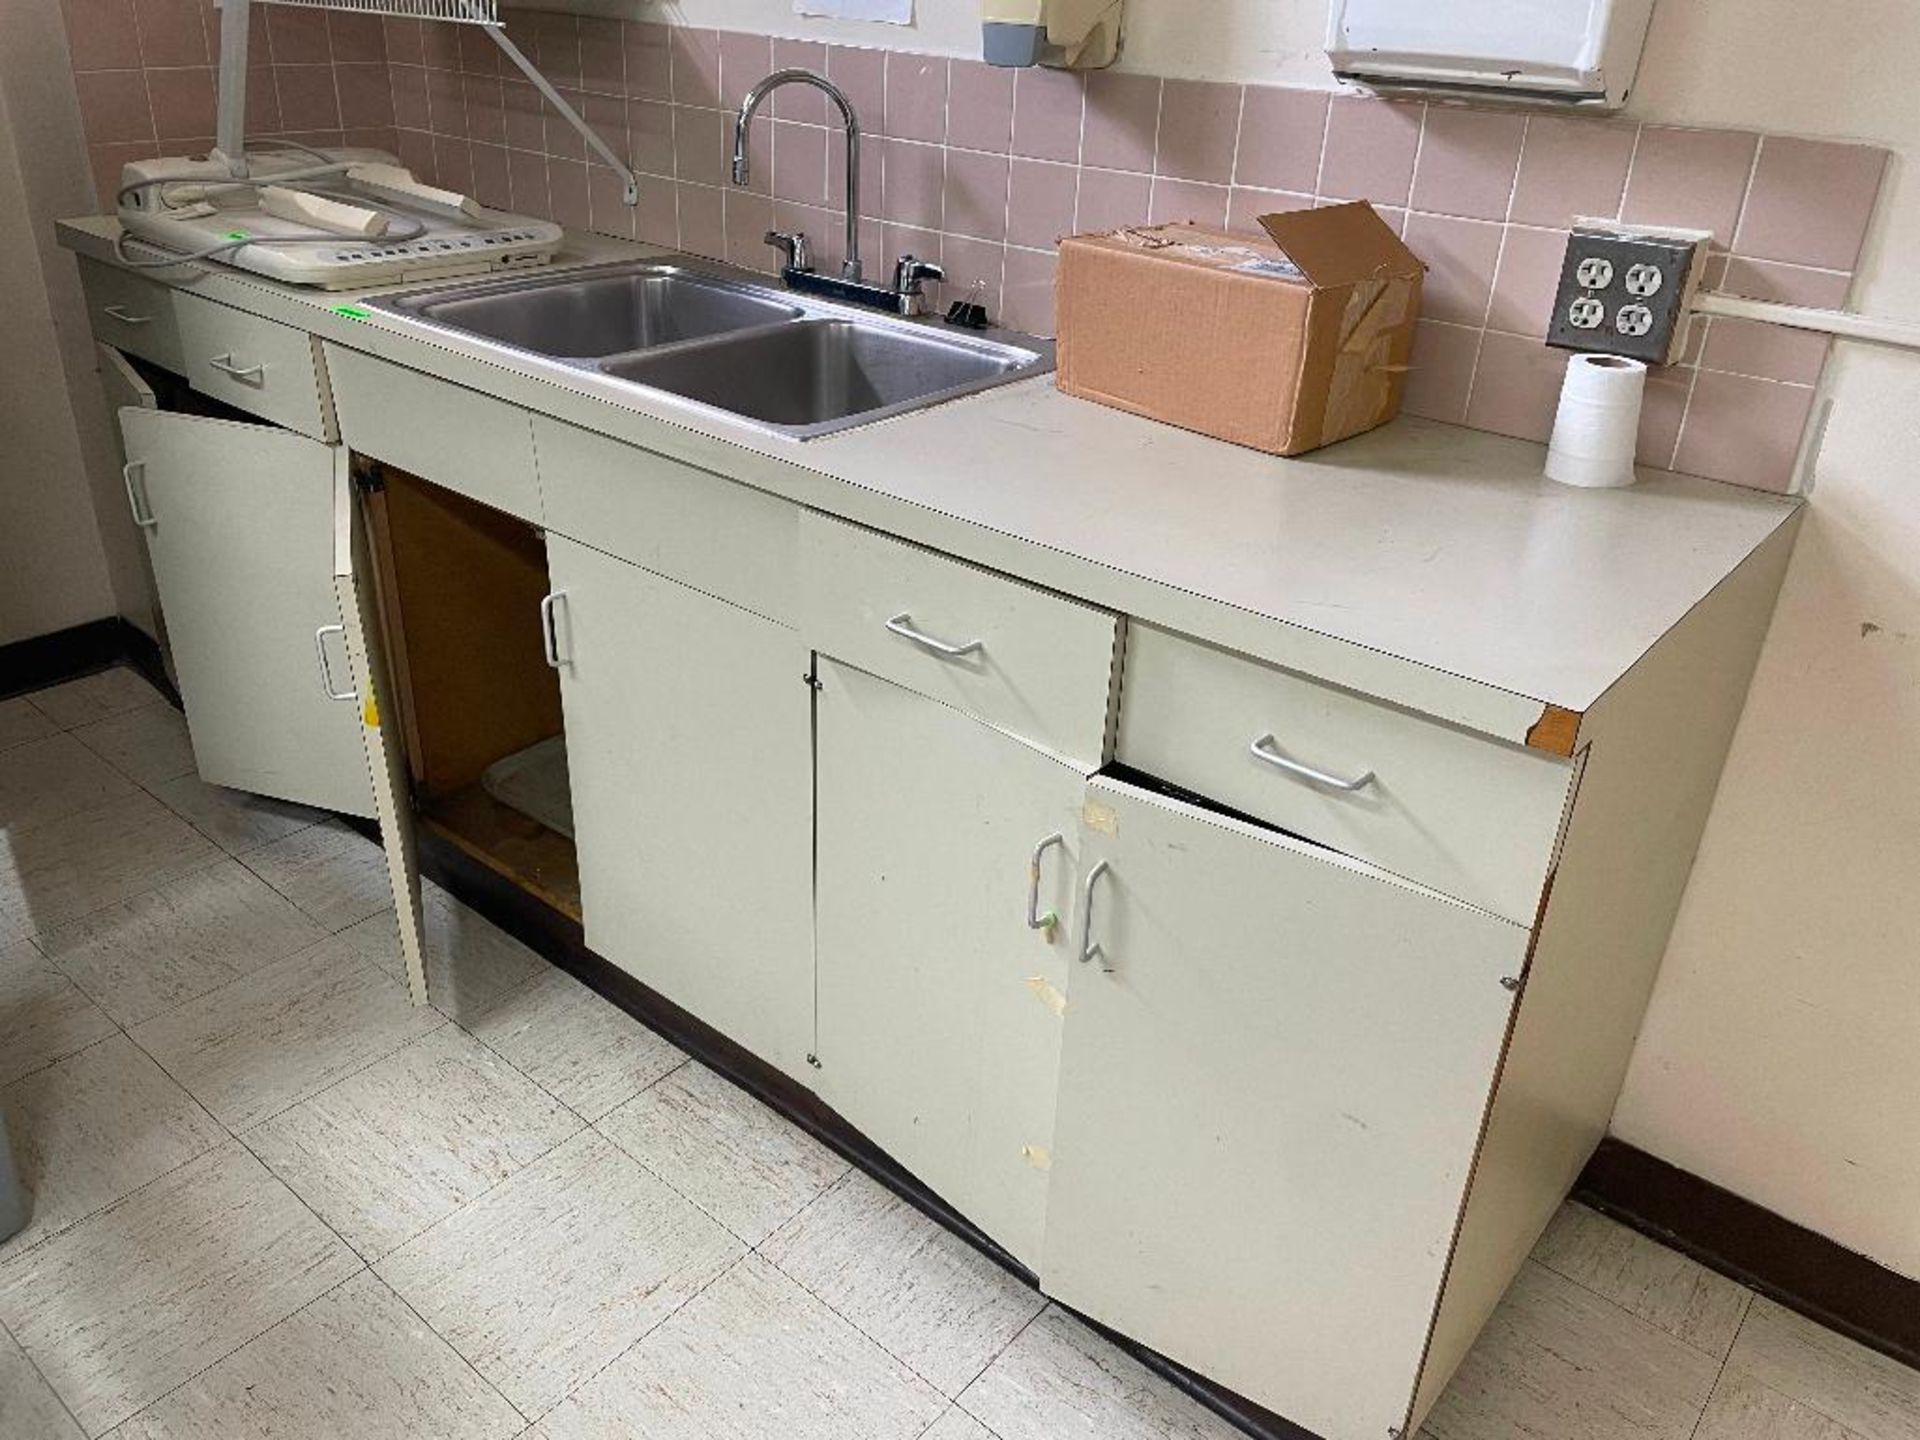 DESCRIPTION: 9' SIX DOOR COMPOSITE CABINET AND COUNTER W/ DROP IN STAINLESS SINK. LOCATION: BASEMENT